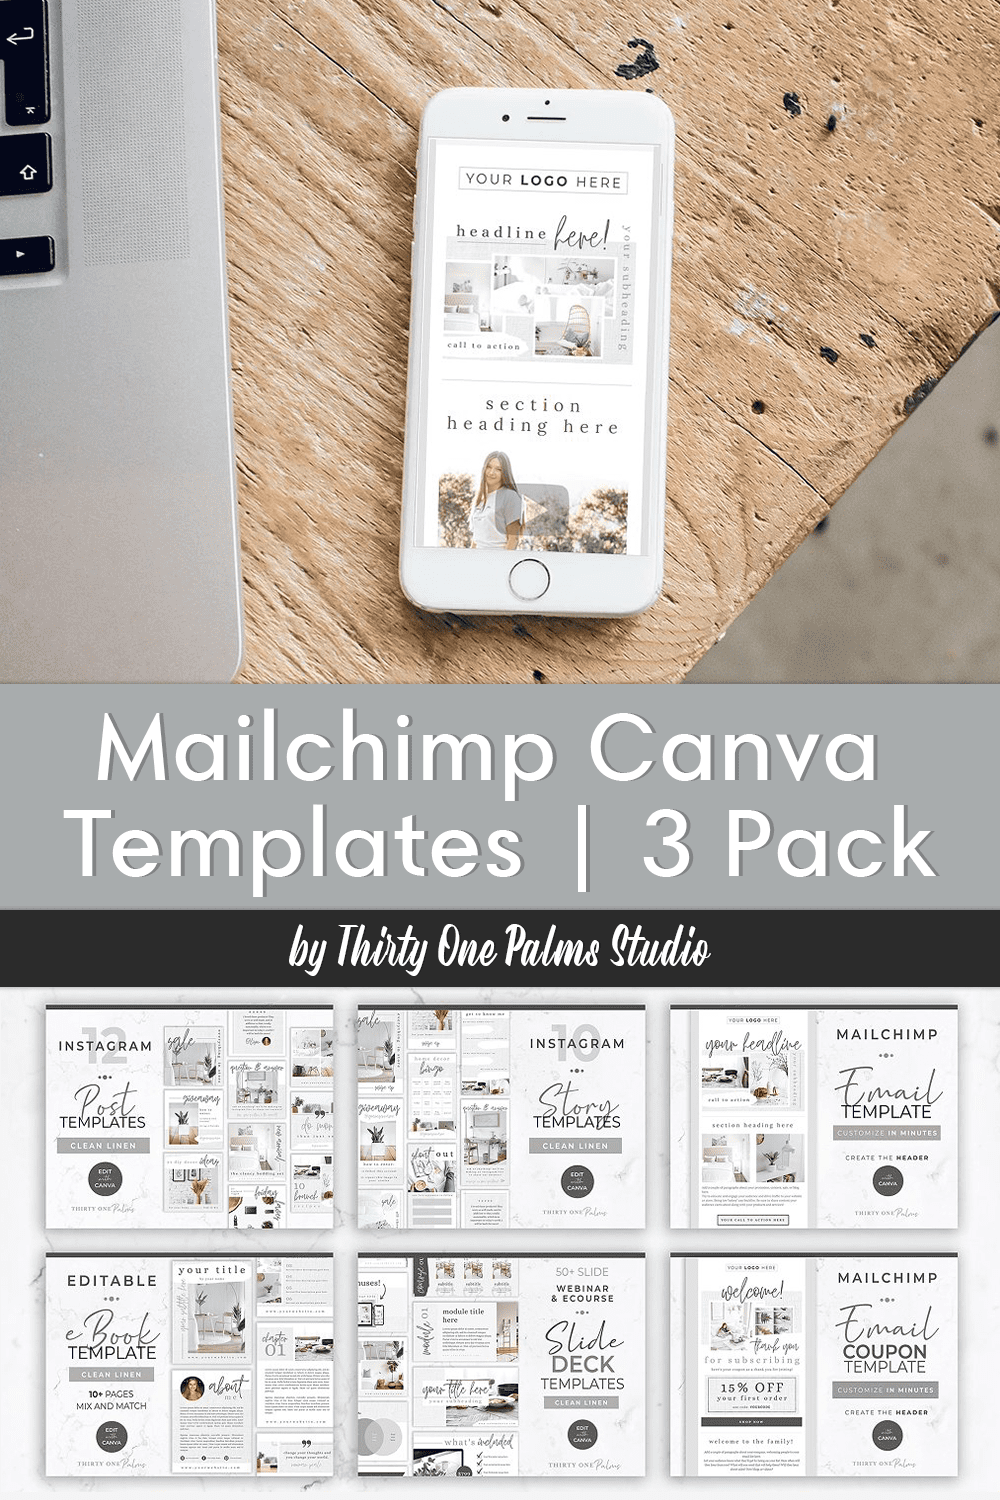 Pack images of great email design templates.